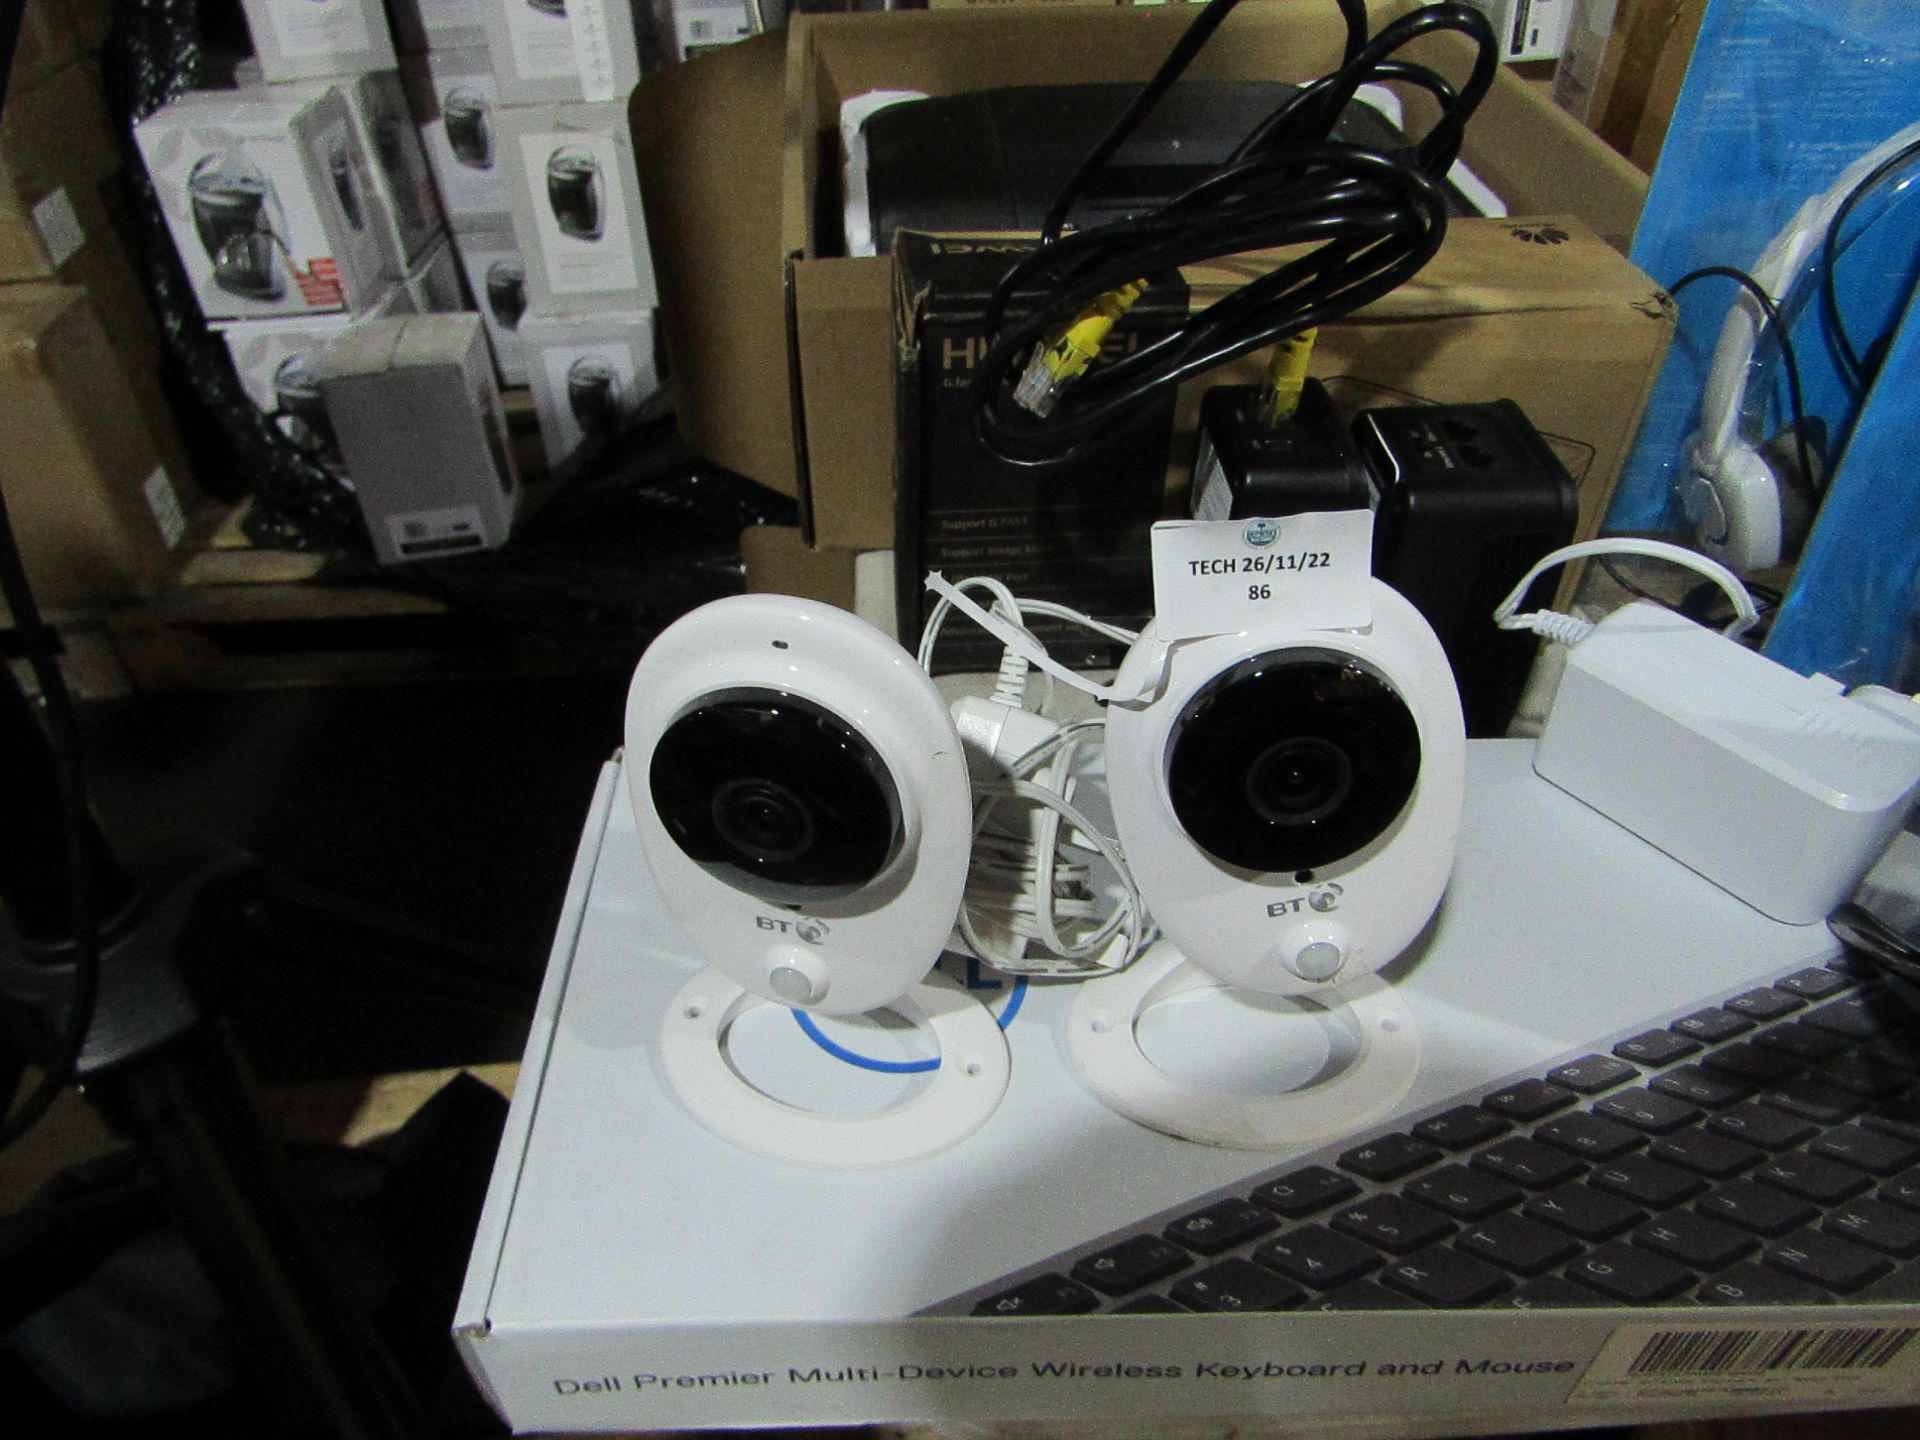 2 x BT Smart Home Cameras, no packaging unchecked